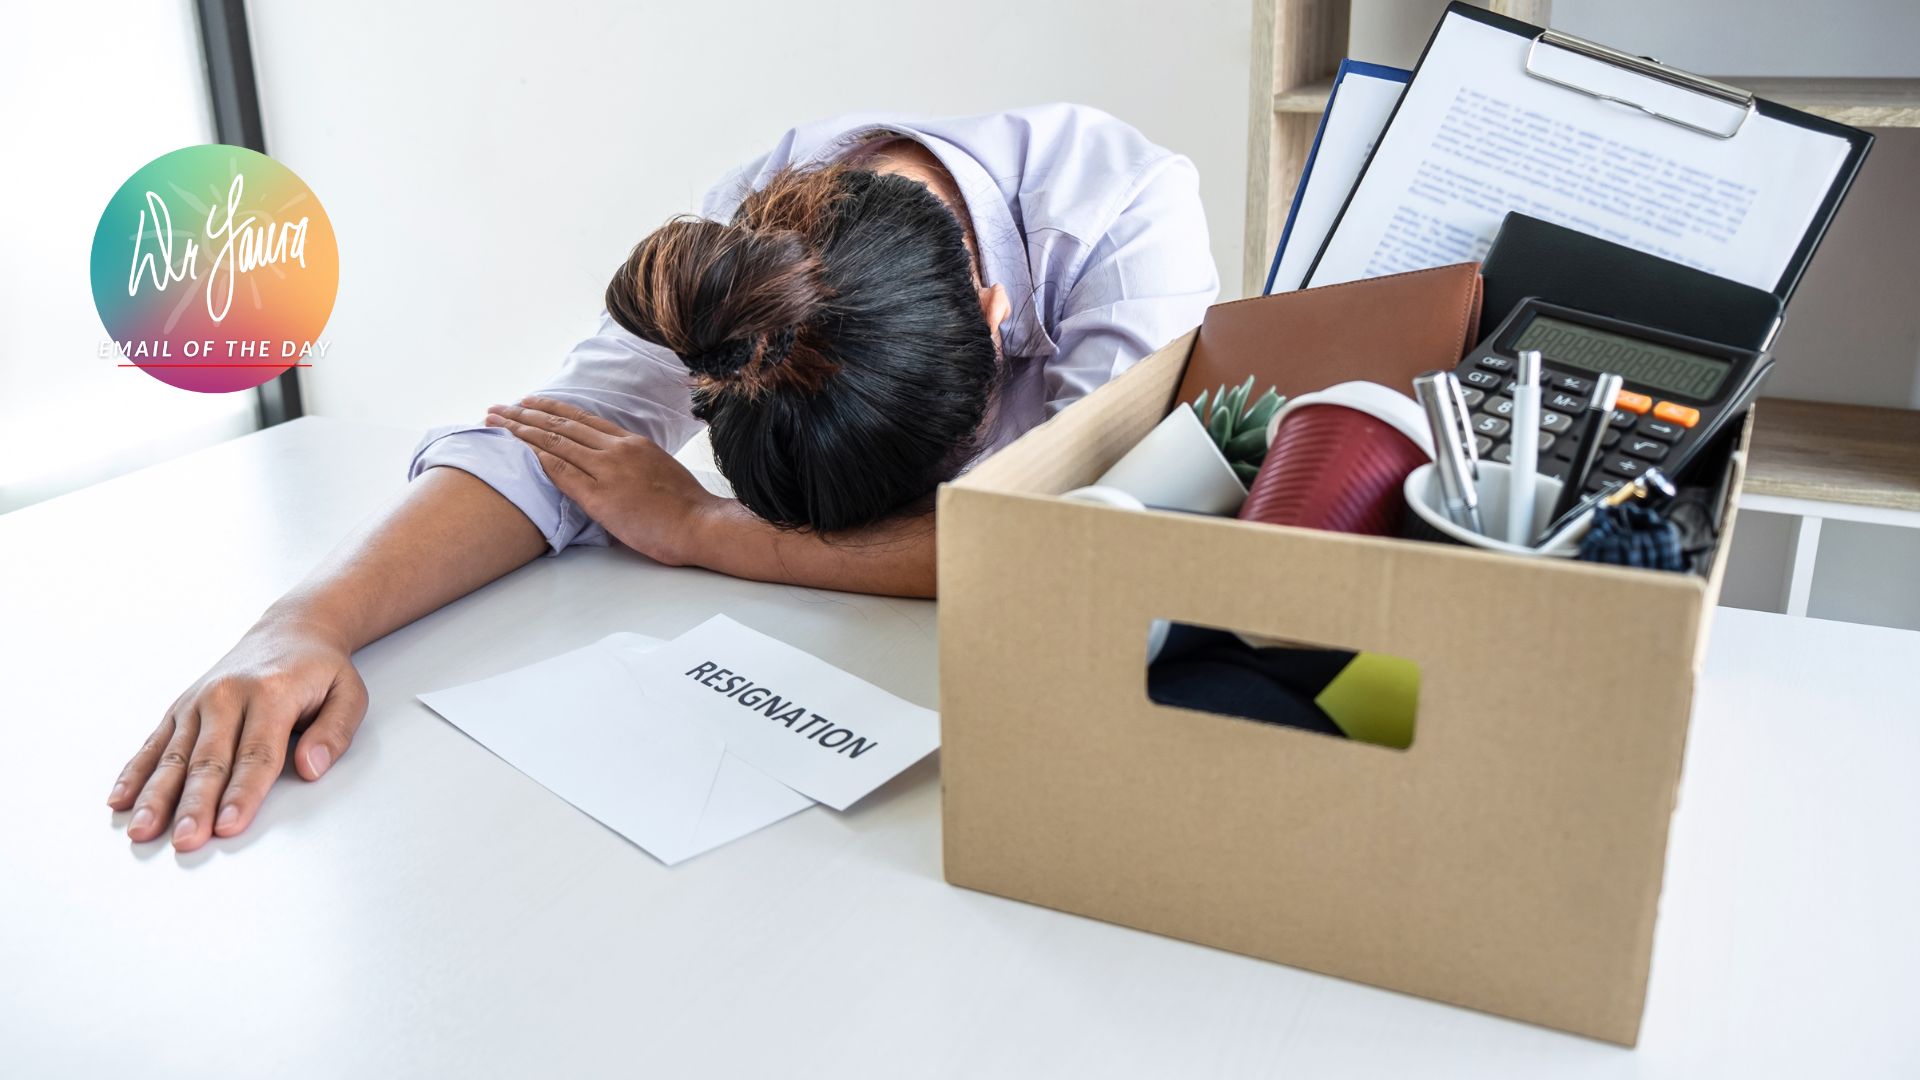 Woman lays head on her desk with a moving box next to her